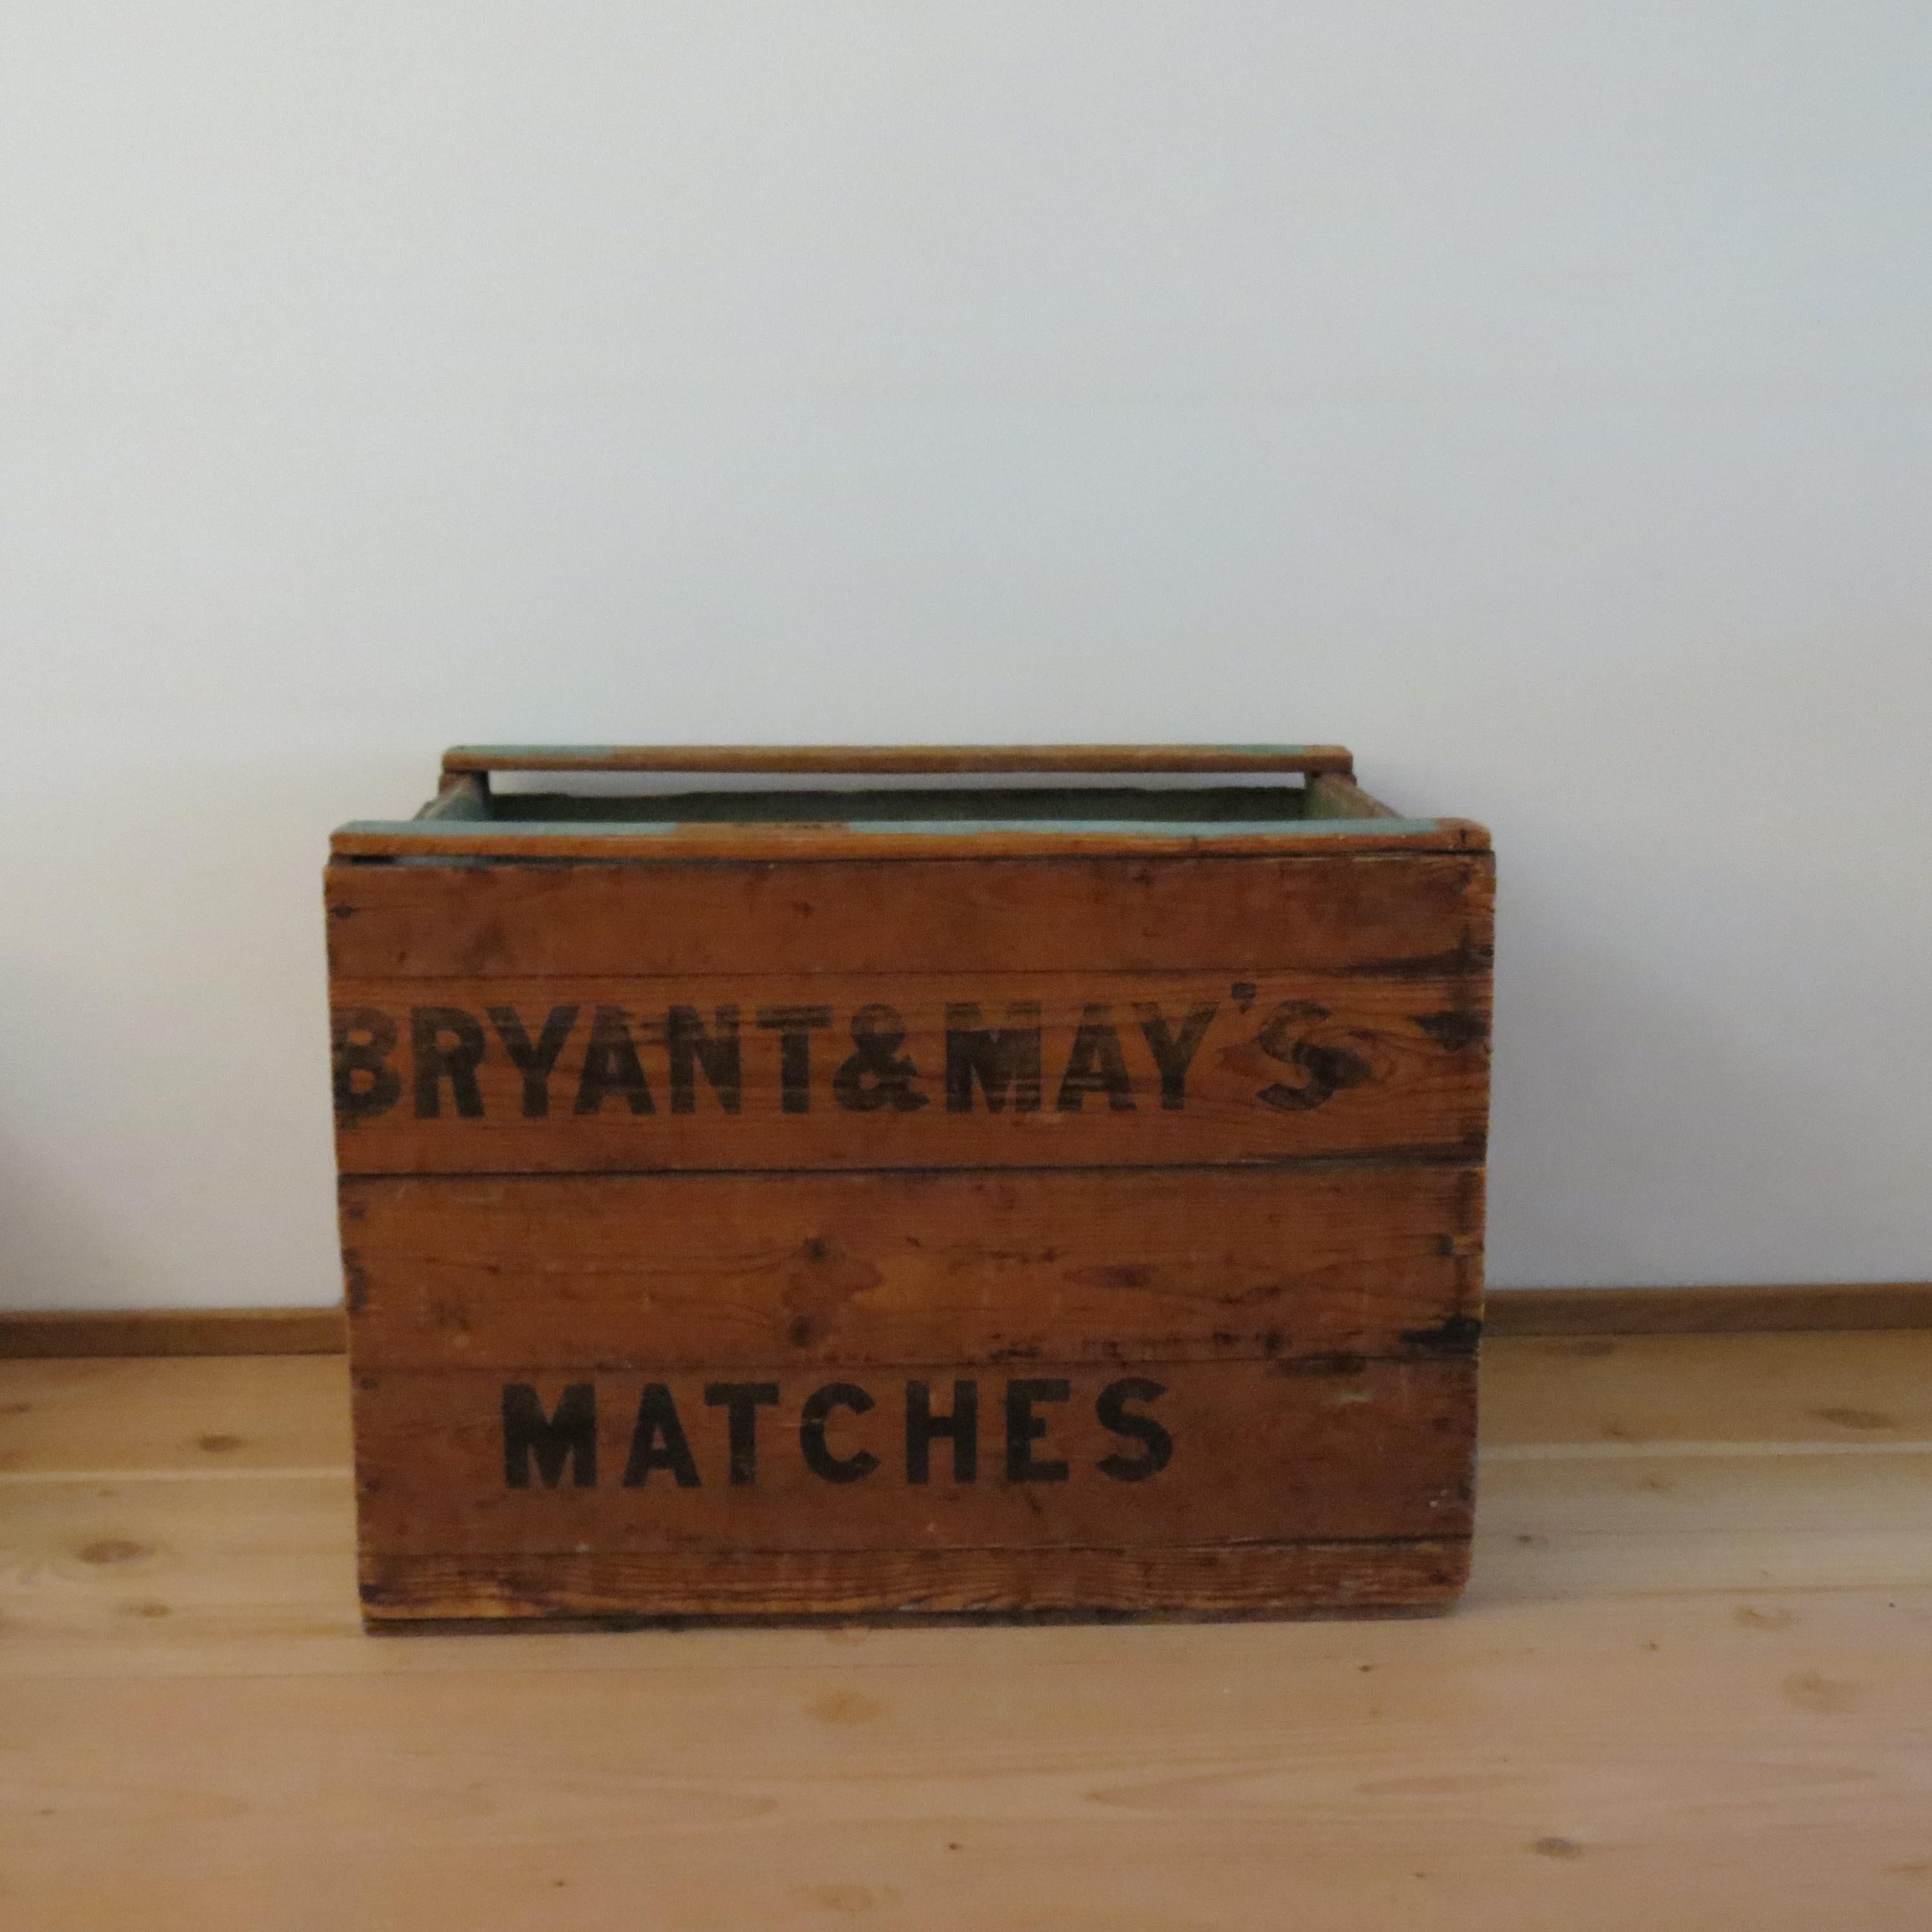 Wonderful vintage wooden storage box. Dates from the 1950s
Bryant and May's Matches stamped to the outside of the box. Would have originally been used to transport matches.
Steel carrying handles have been added to the outside box at later date,